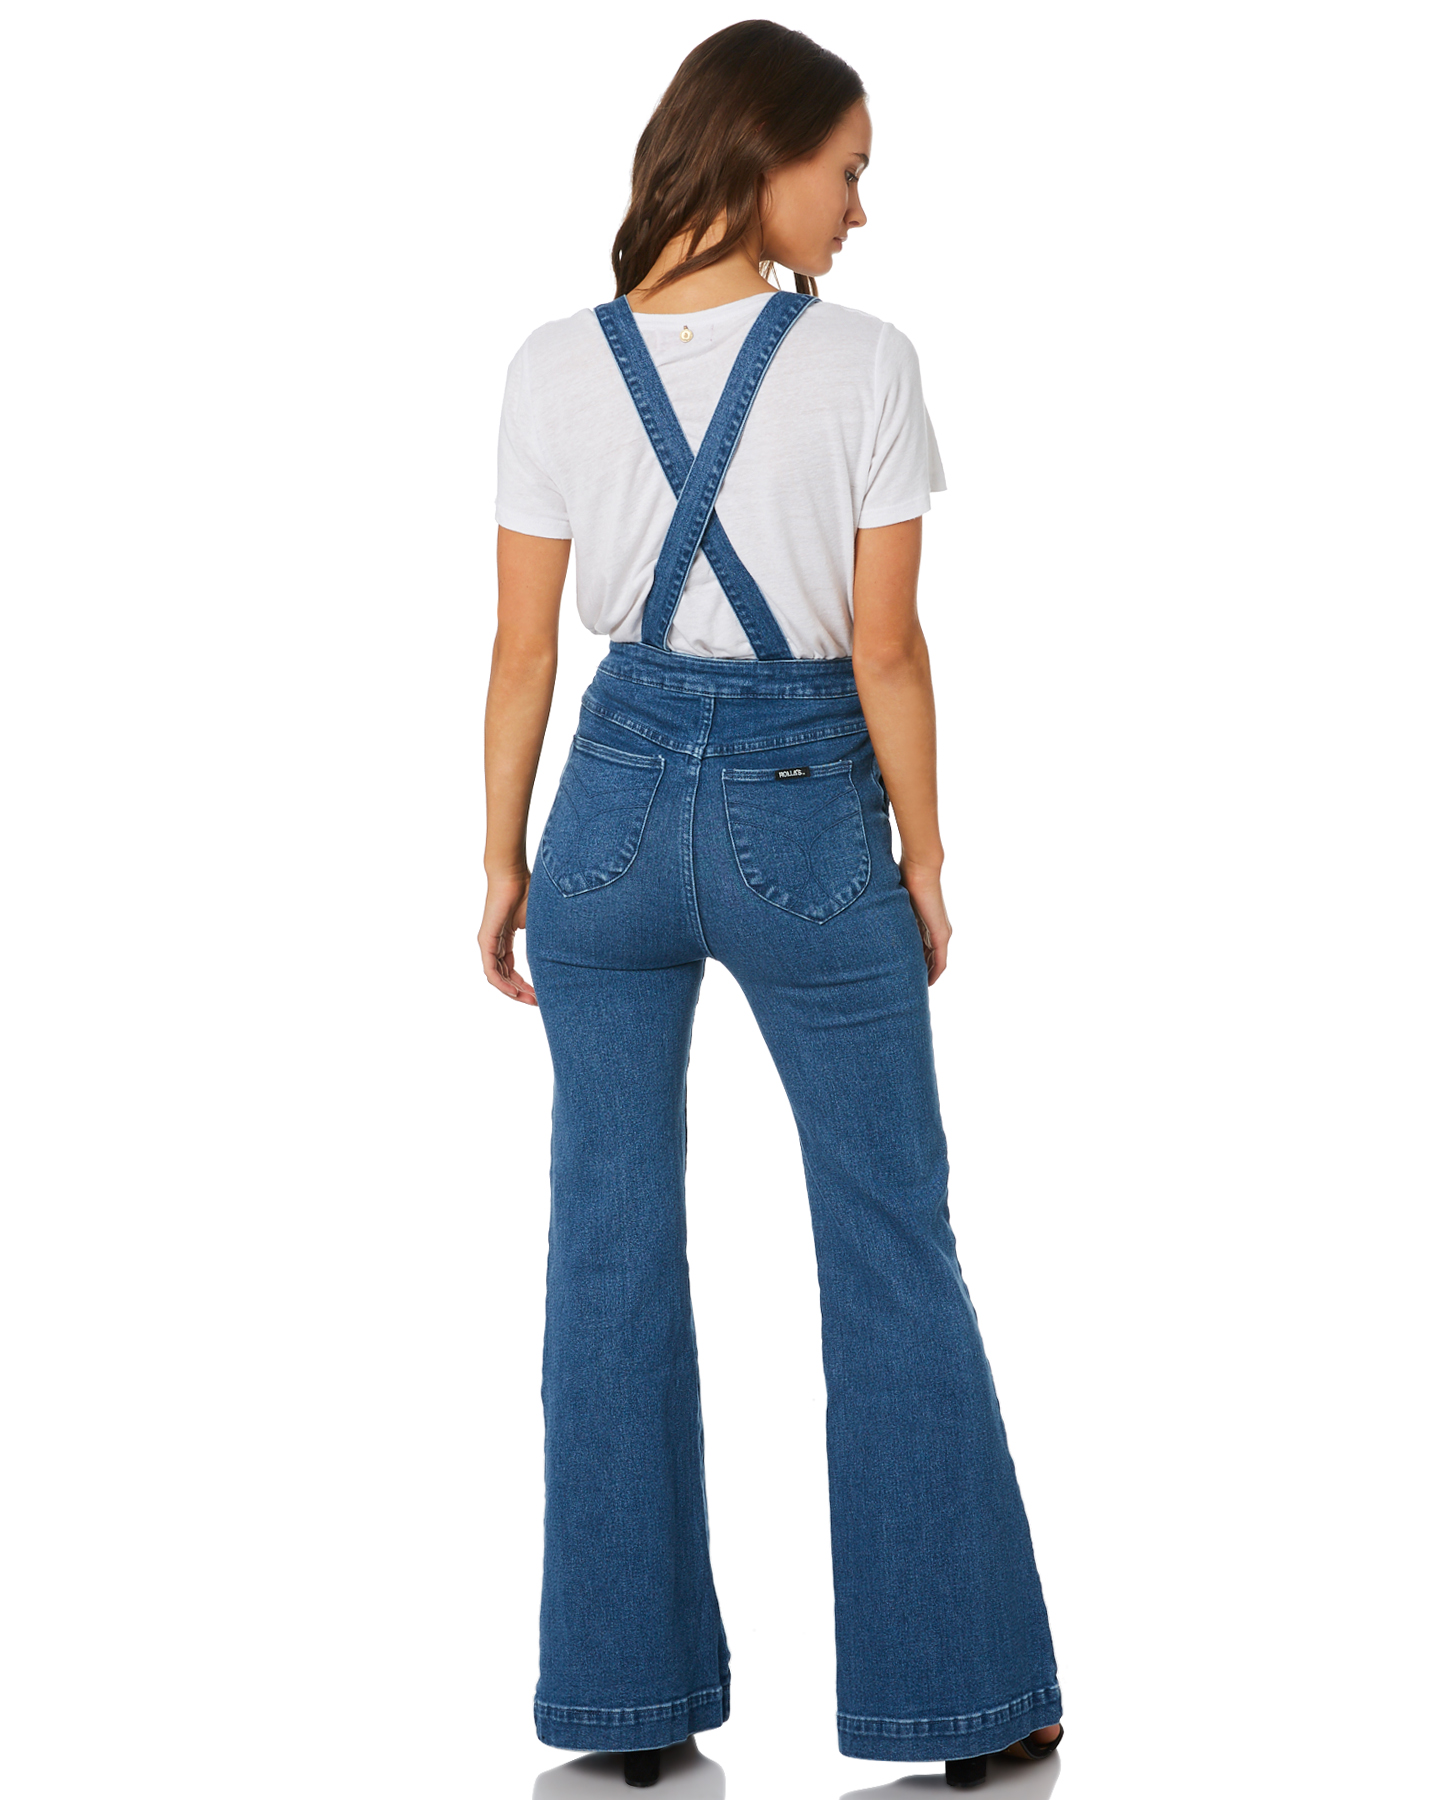 Judy Blue Overalls Size Chart